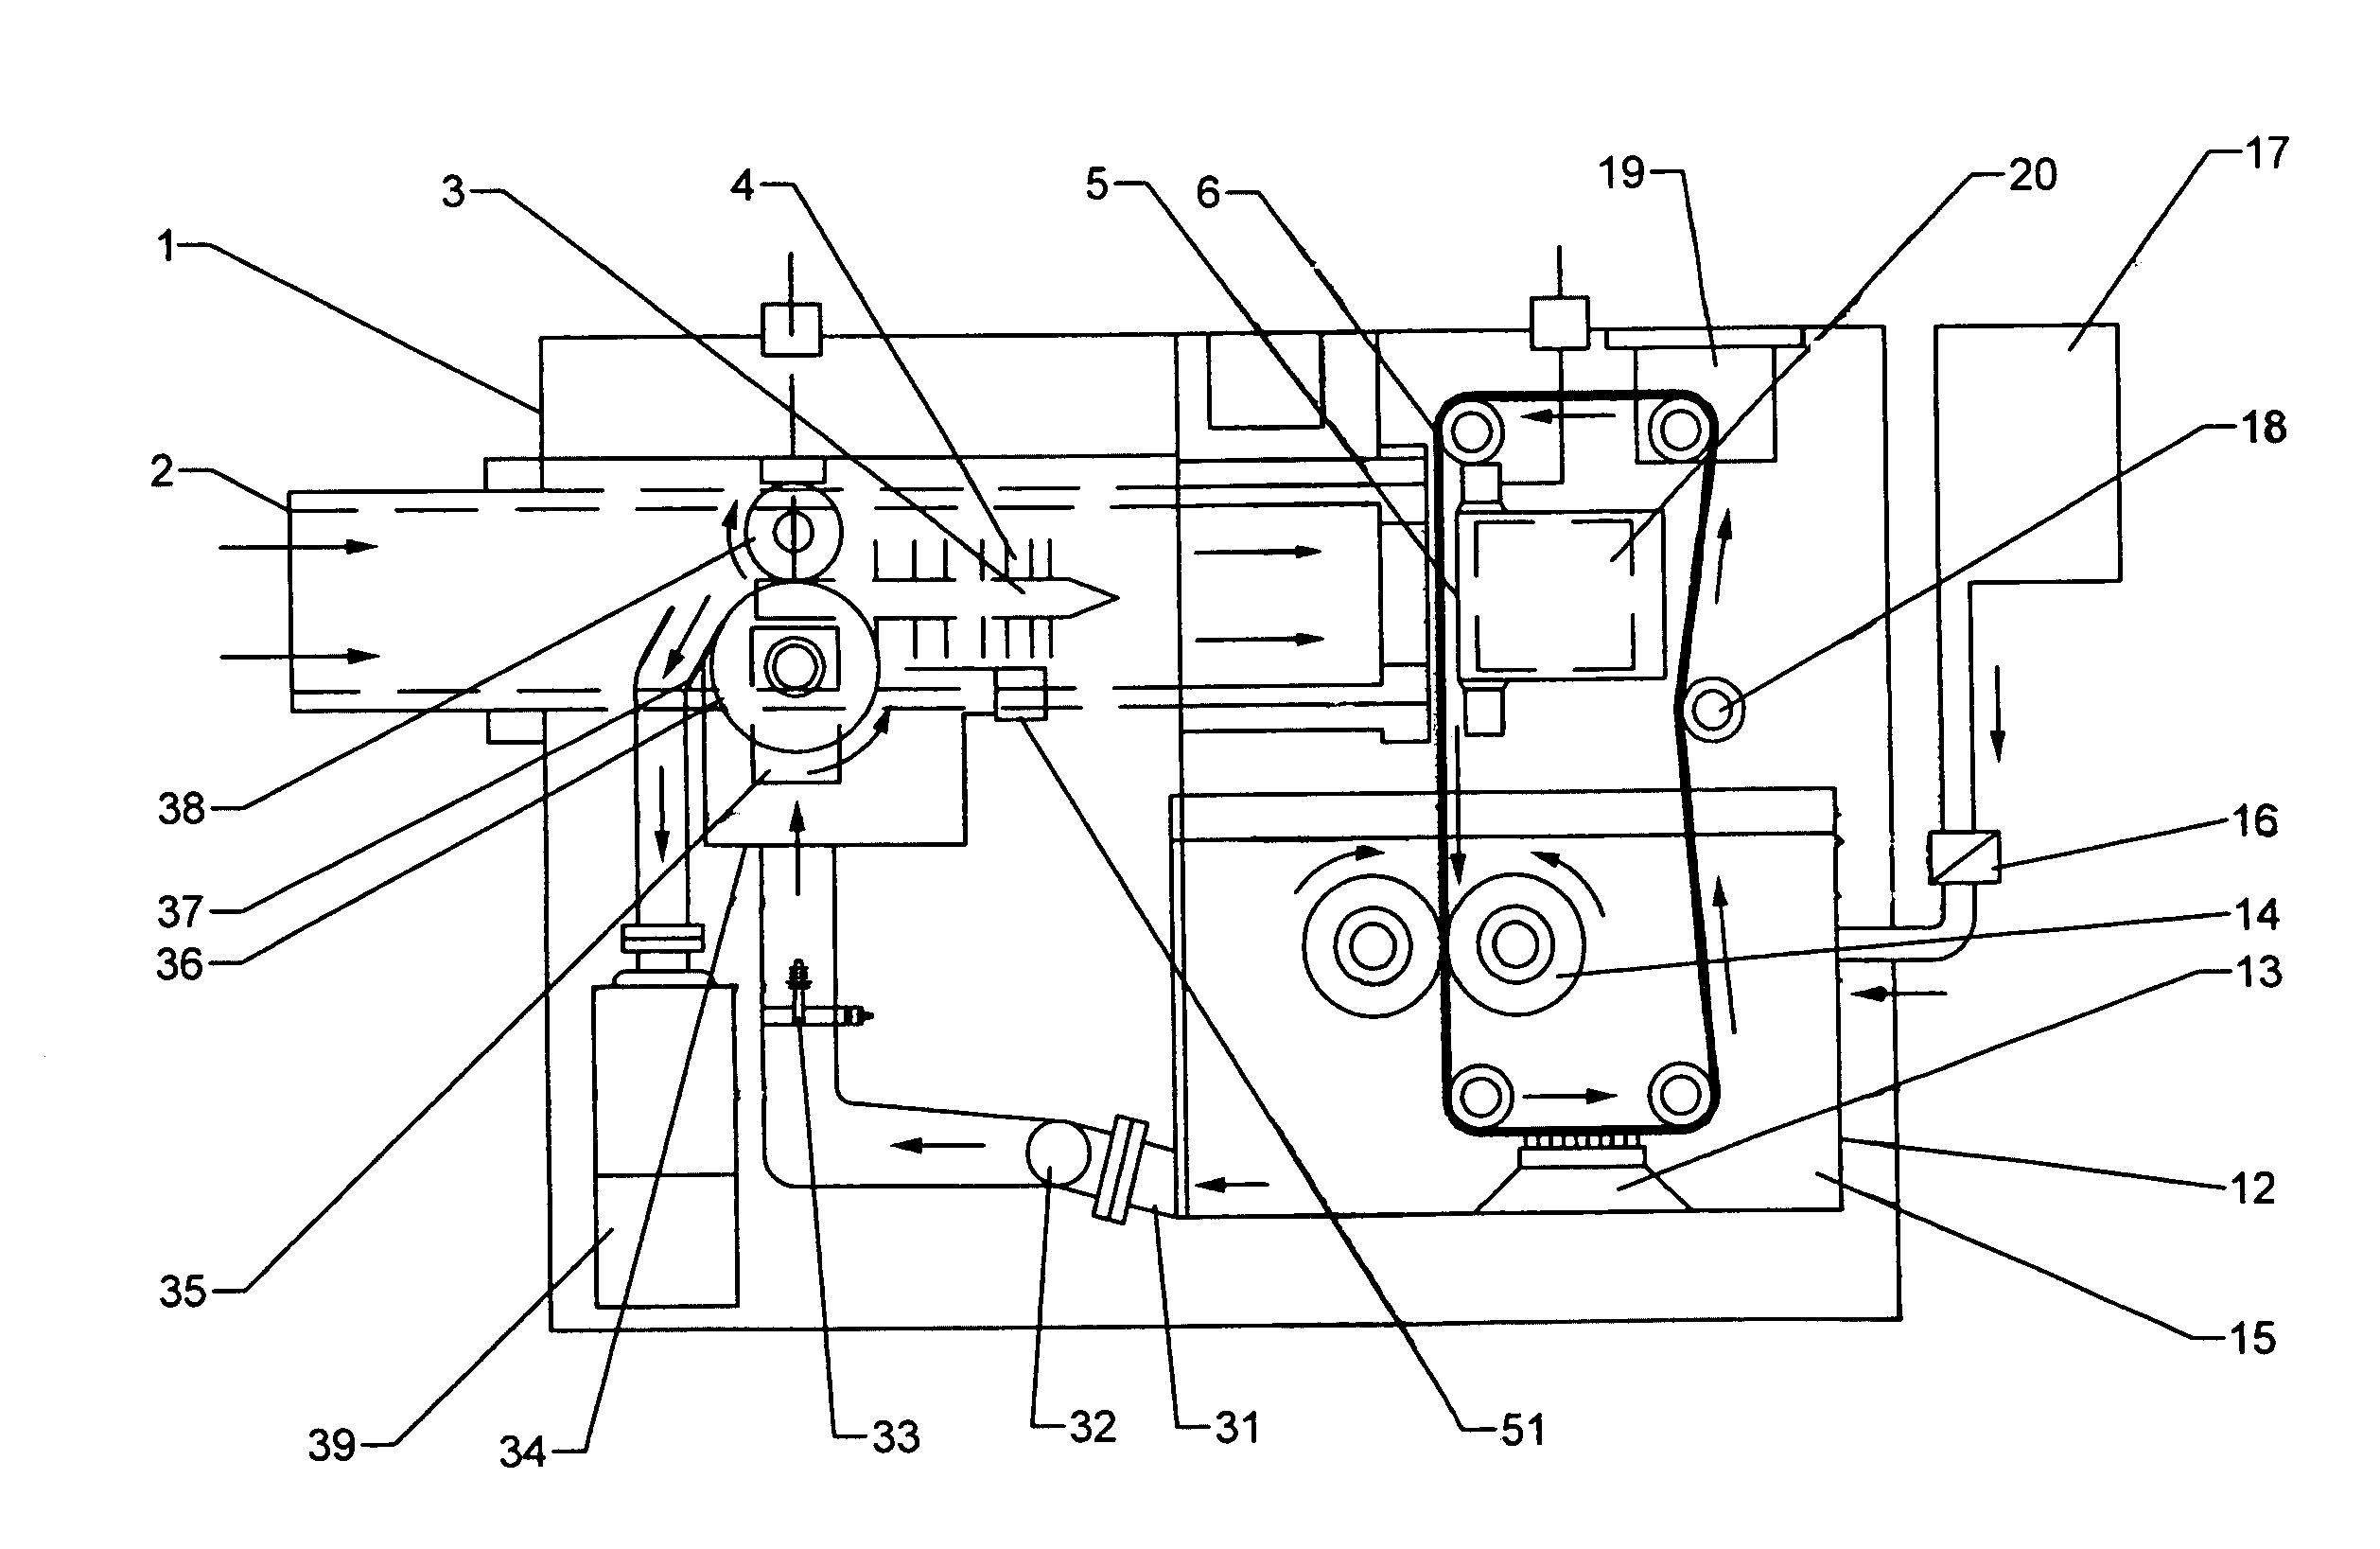 Carbon separation and collection device used for high performance dust collector